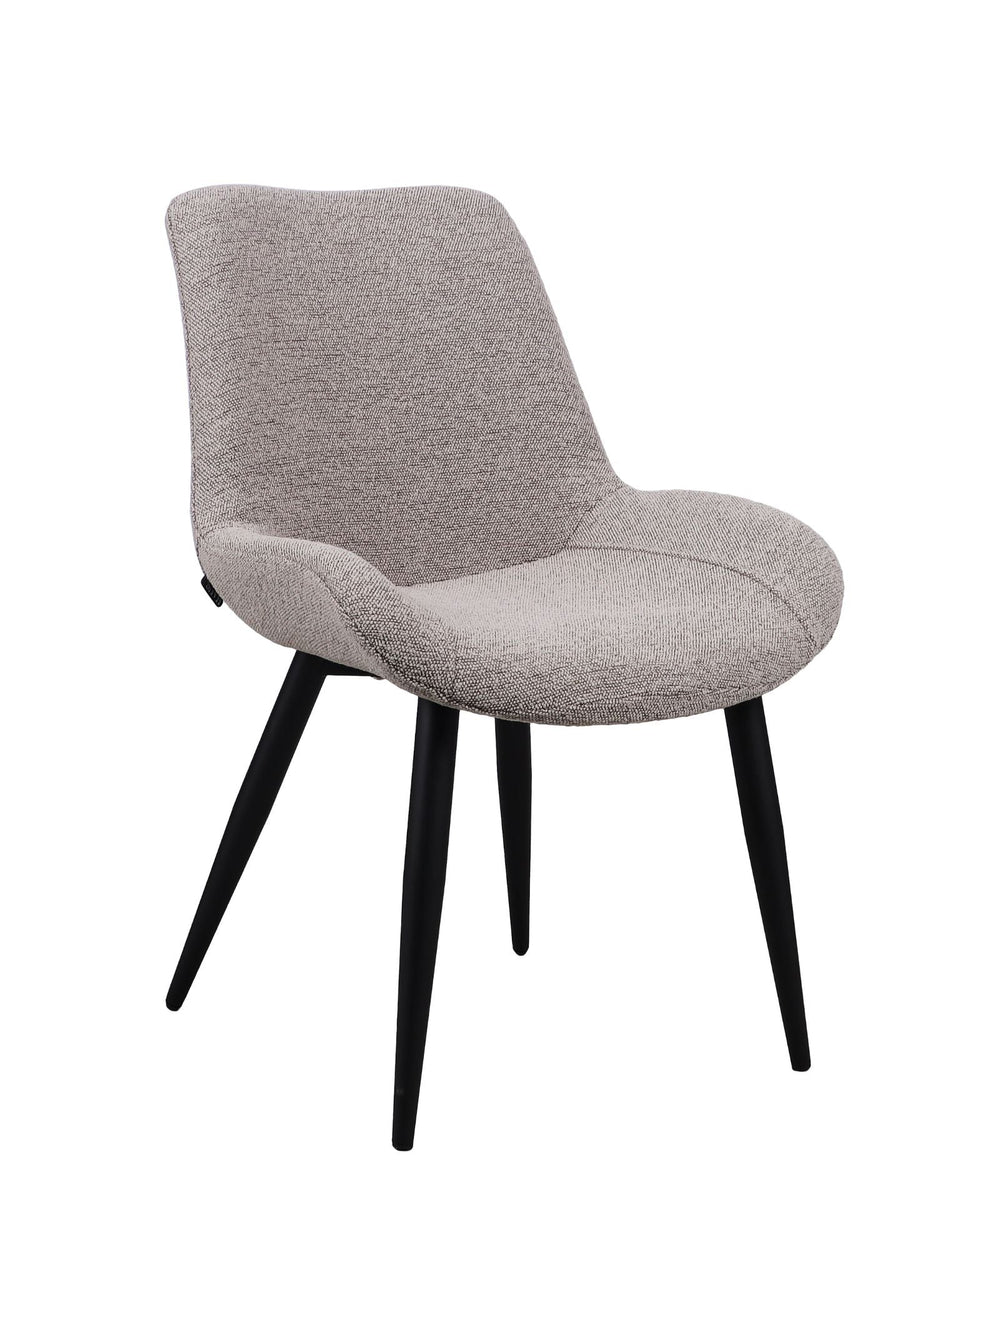 Gladstone Cologne Dining Chair in Dove - Kitchen & Dining Room Chairs- Hertex Haus Online - Furniture